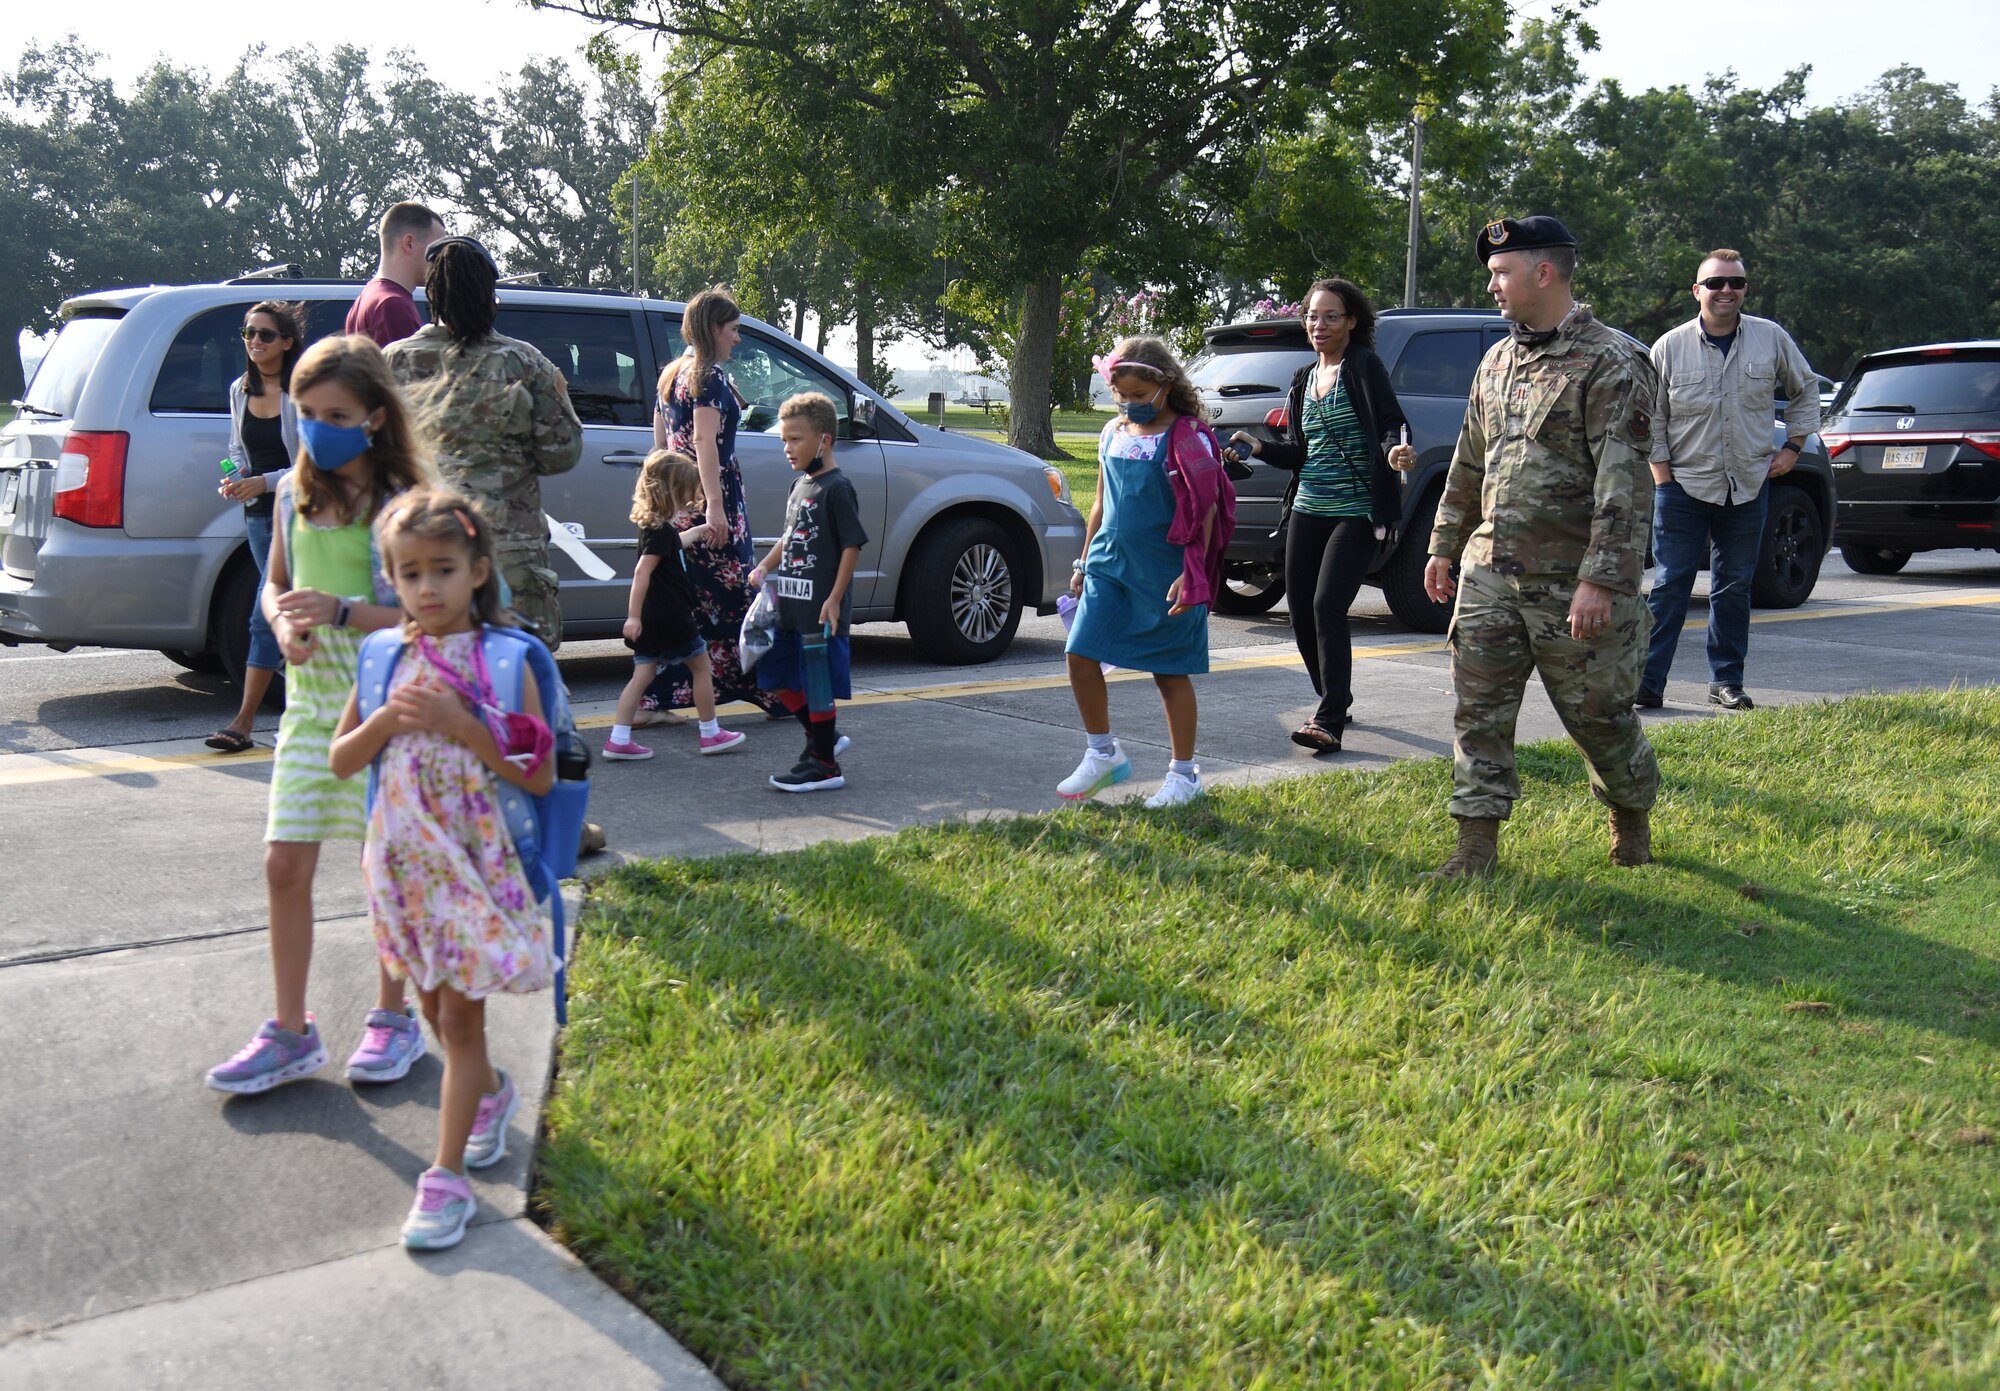 Members of the 81st Security Forces Squadron greet military families for the first day of school near the pedestrian gate at Keesler Air Force Base, Mississippi, Aug. 4, 2021. Defenders and their mascot welcomed the children with stickers as they went to Jeff Davis Elementary School. (U.S. Air Force photo by Kemberly Groue)